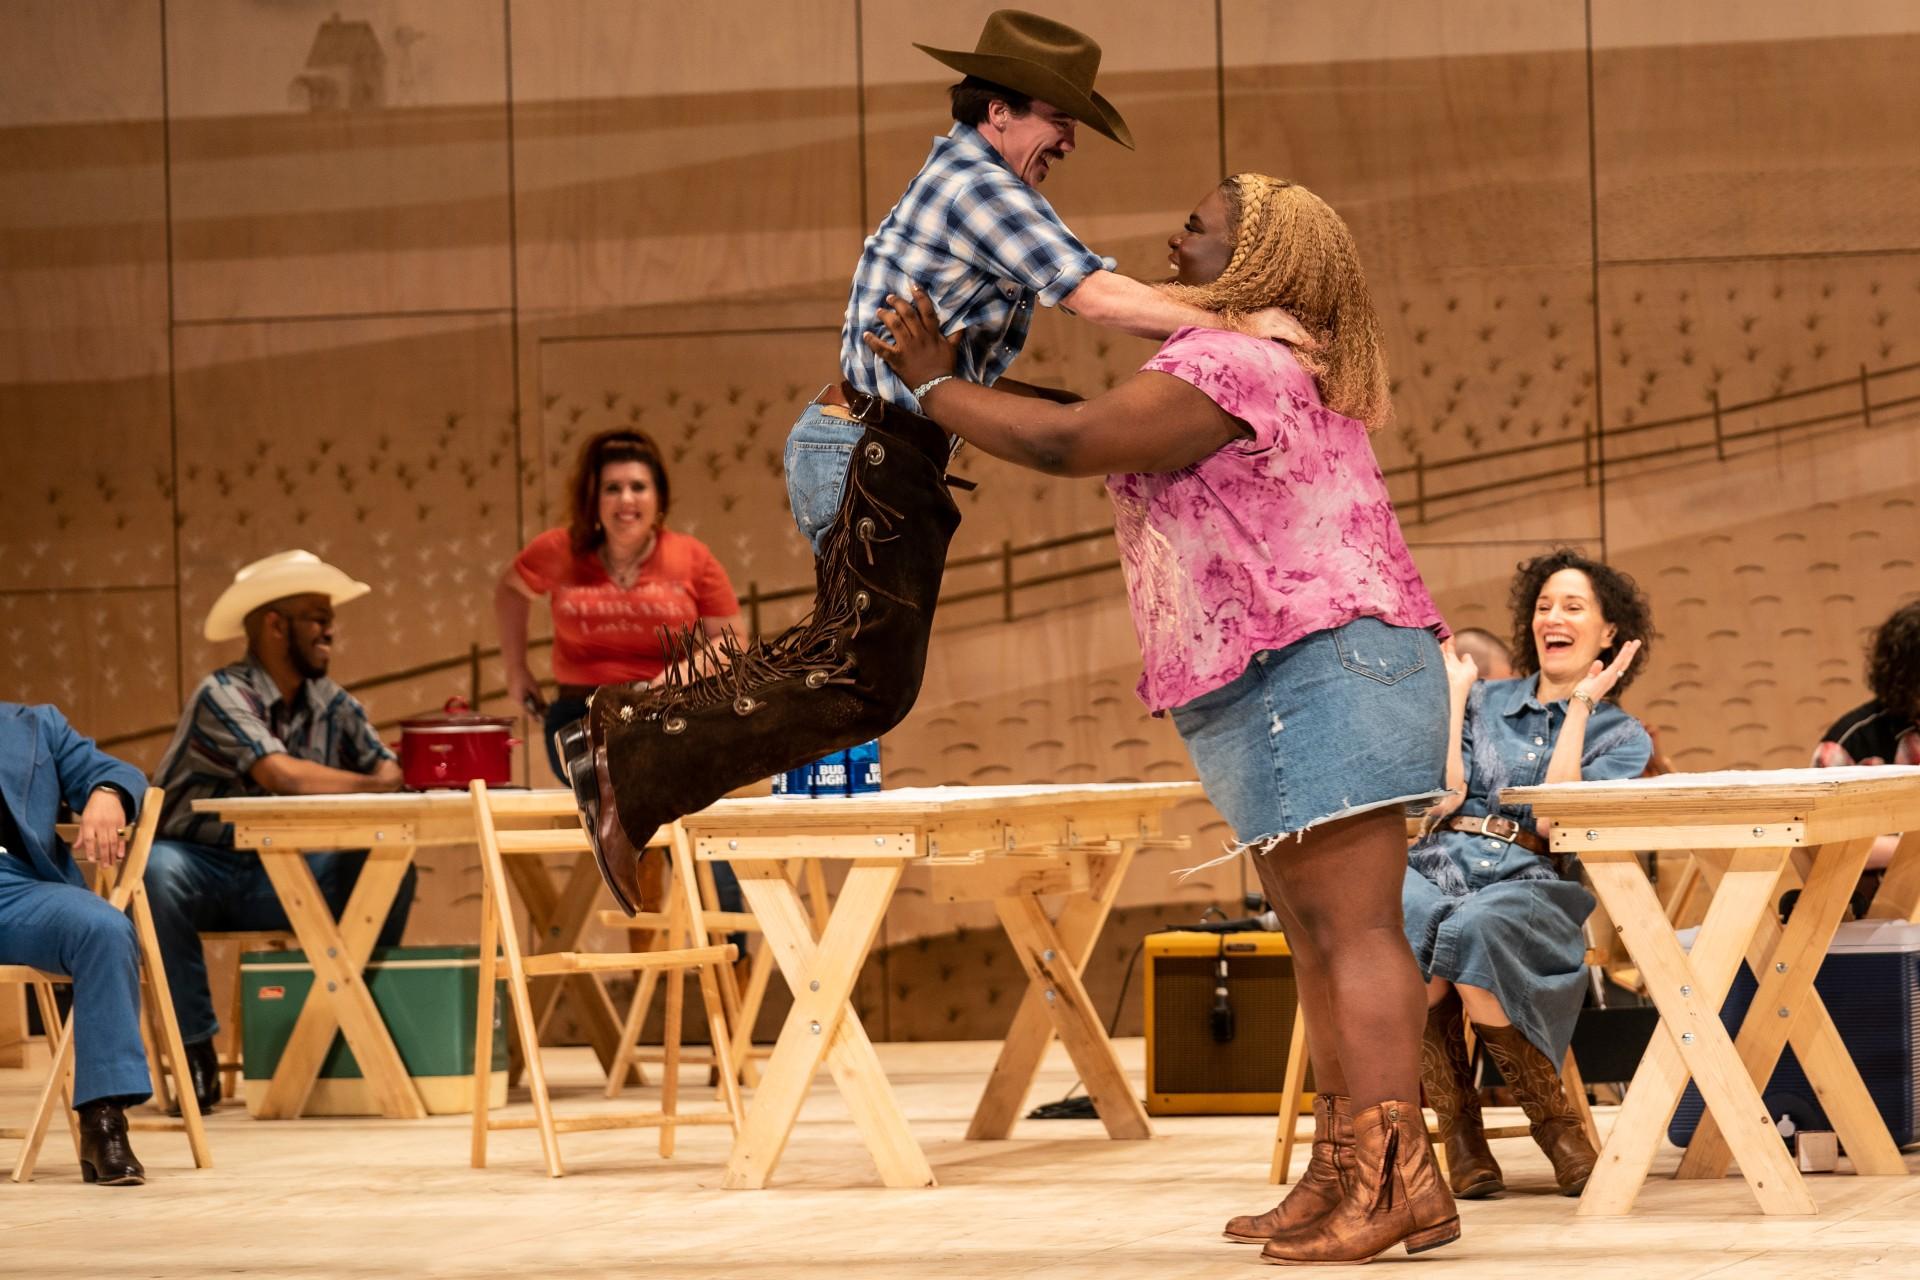 Hennessy Winkler, Sis and the company of the national tour of Rodgers & Hammerstein’s “OKLAHOMA!” (Matthew Murphy and Evan Zimmerman for MurphyMade)